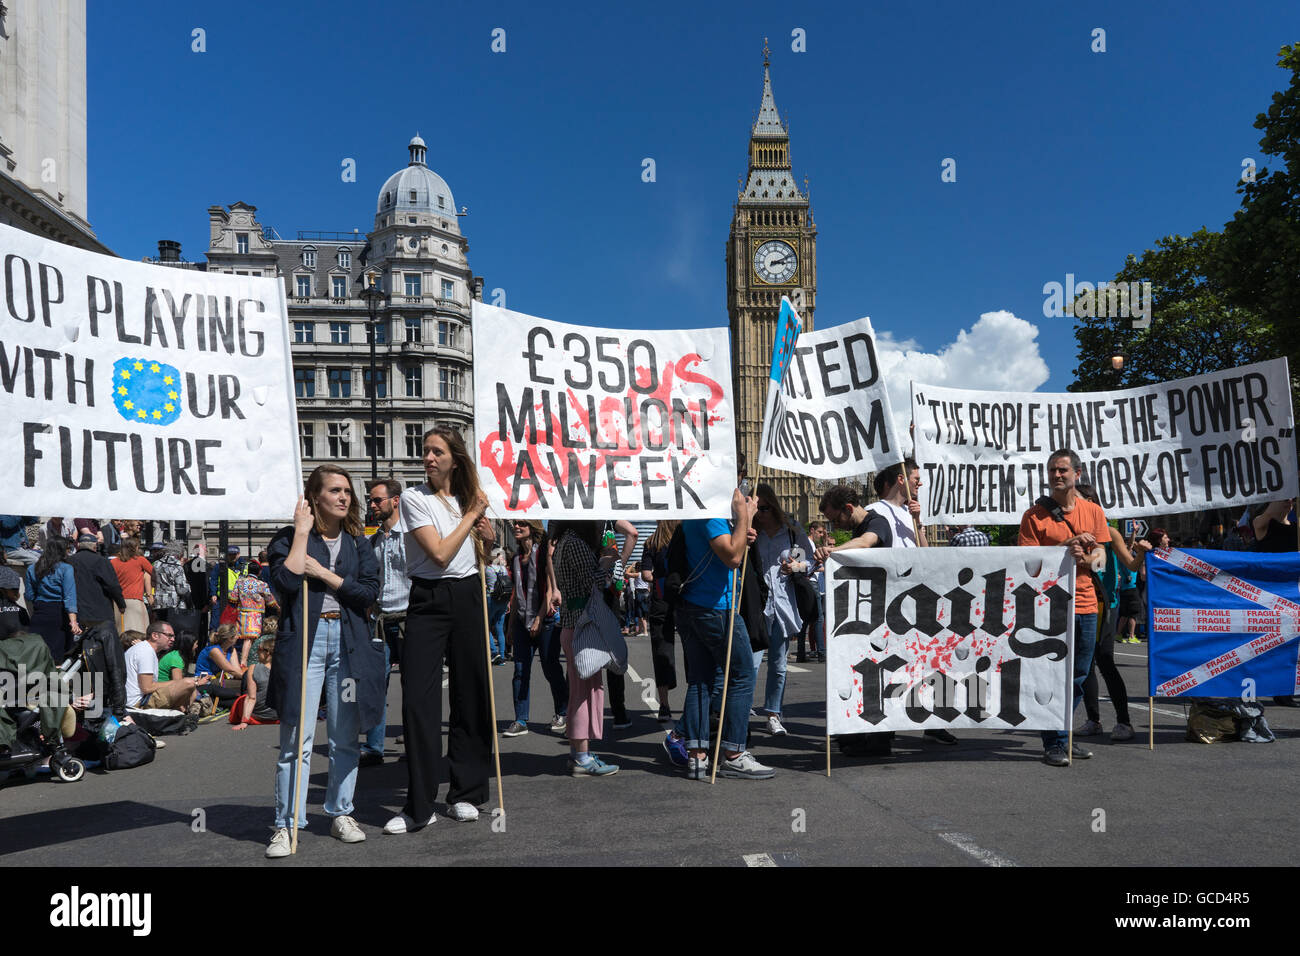 Anti- Brexit protestors wave banners against the UK Governments decision to leave European Union, crowds on street near parliament westminster. Stock Photo